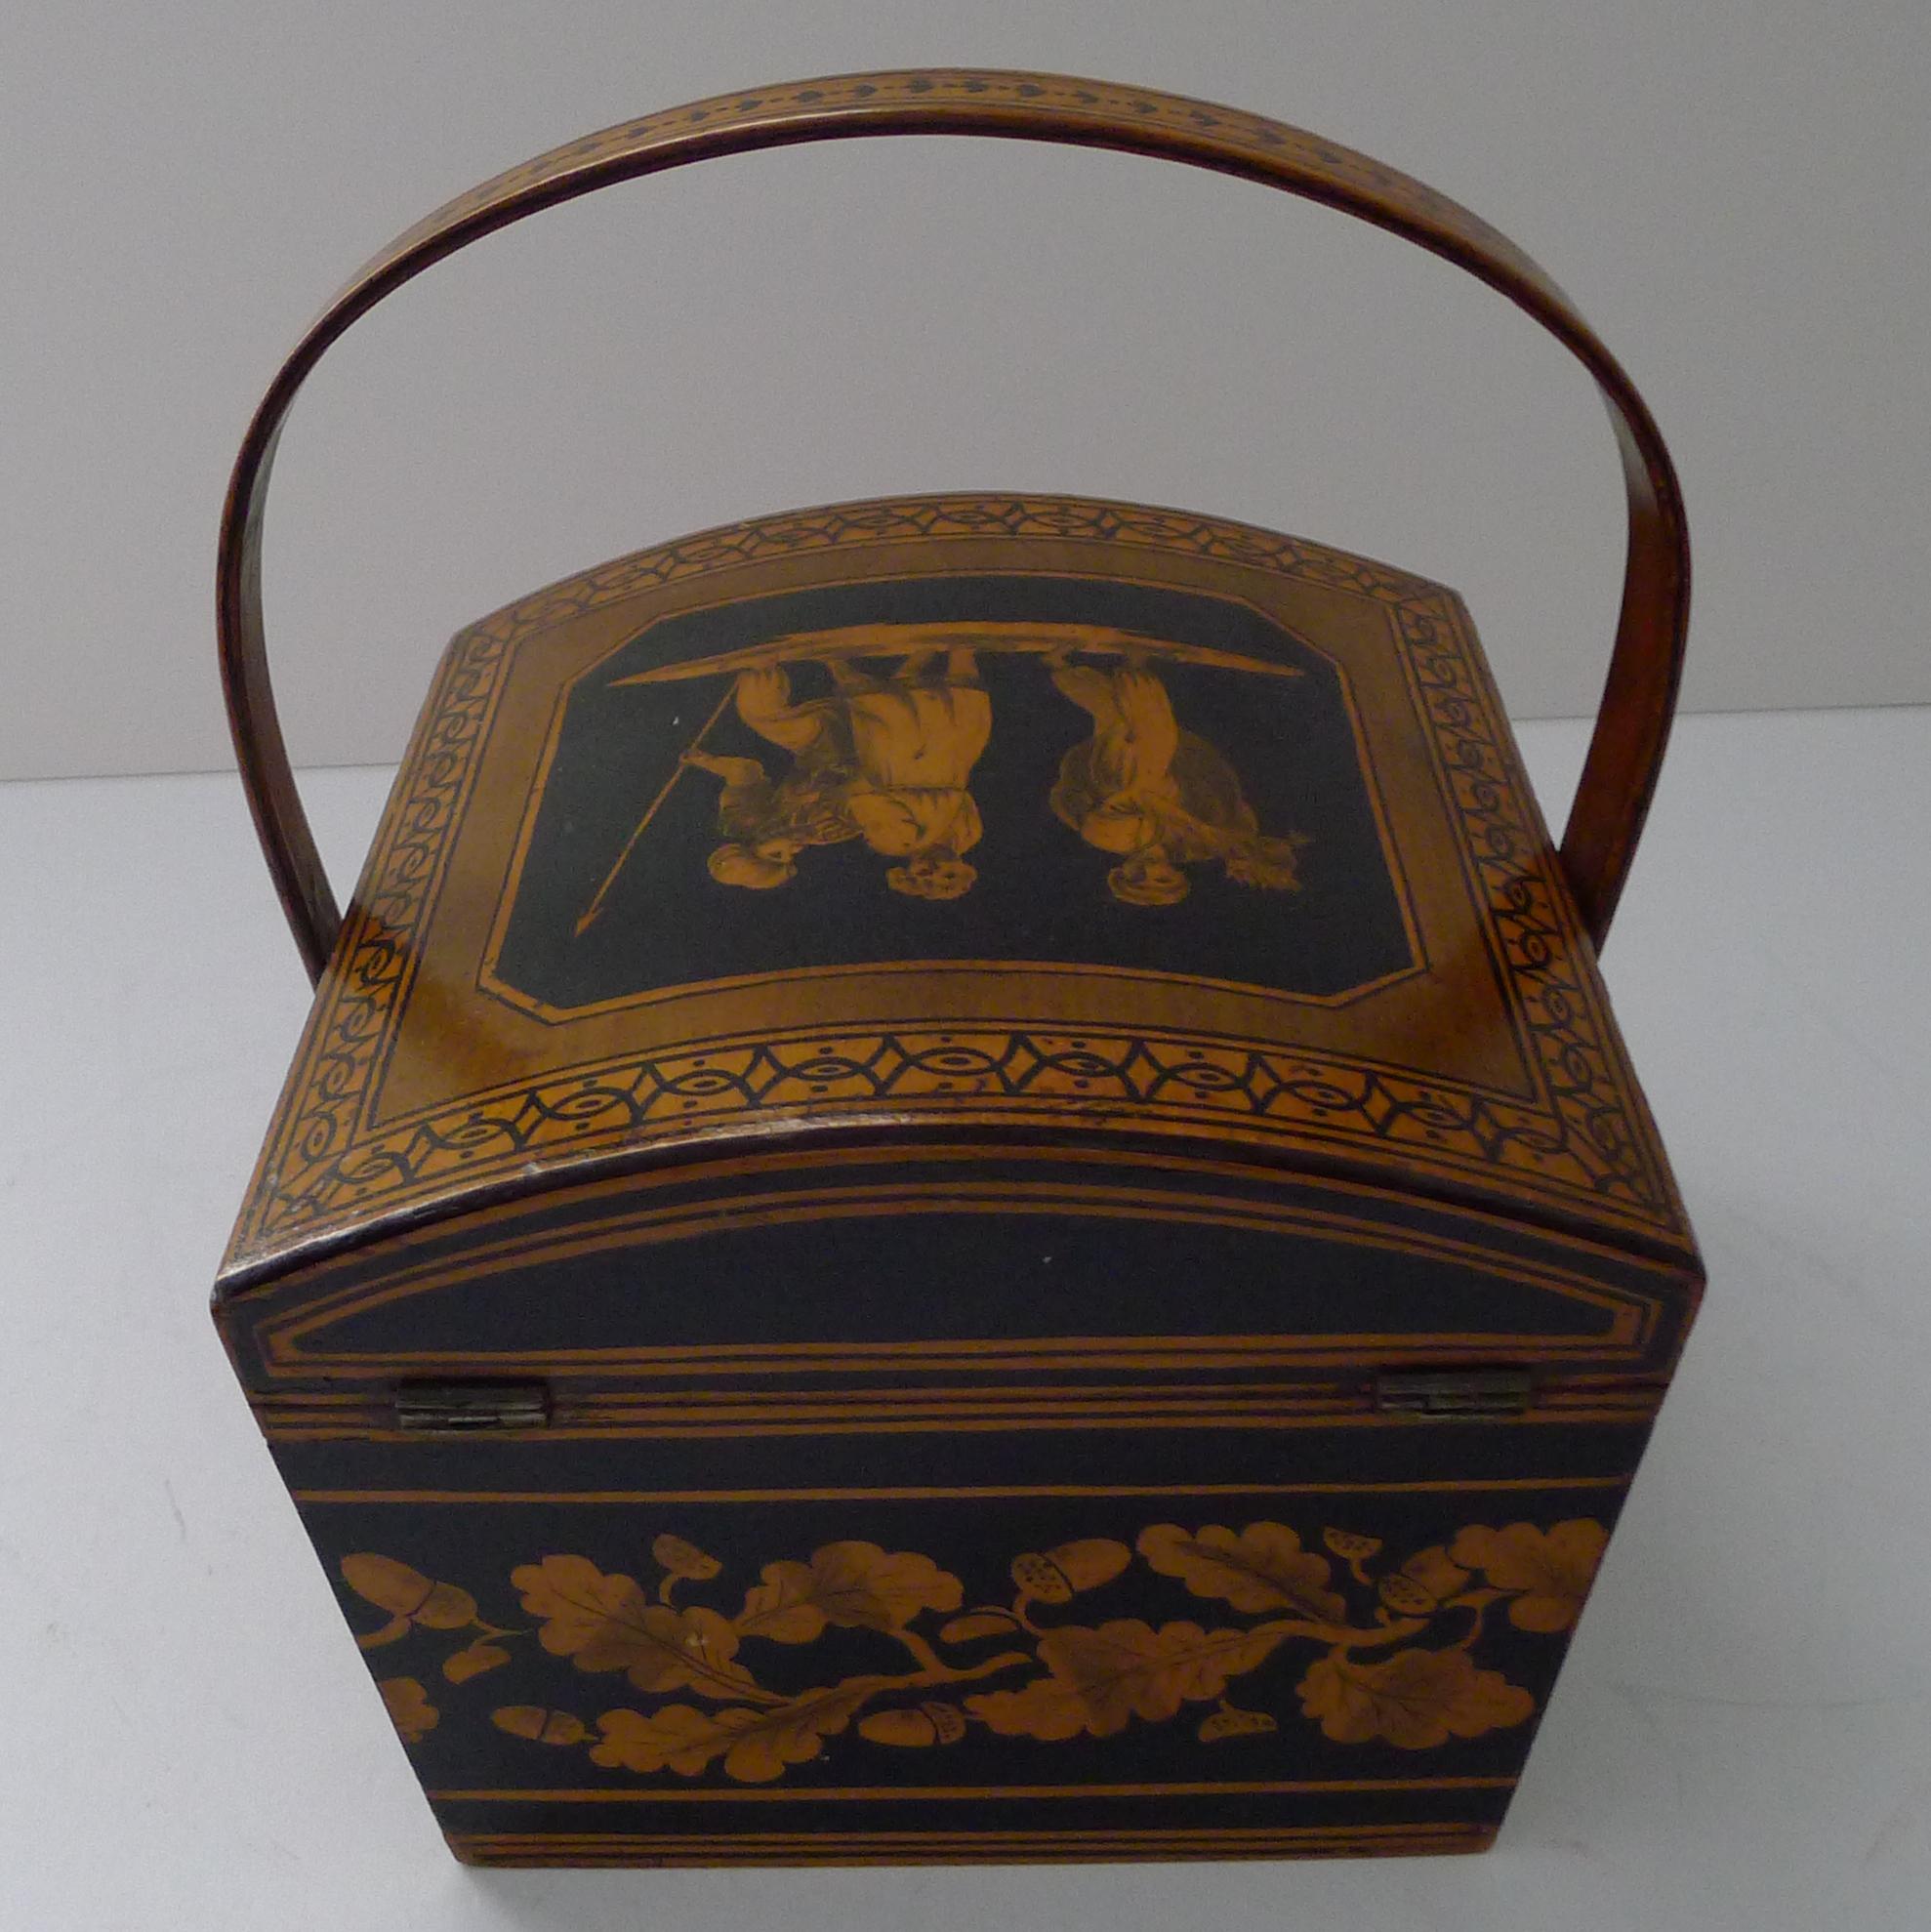 Wonderful Antique English Penwork Sewing Box / Basket c.1820 In Good Condition For Sale In Bath, GB